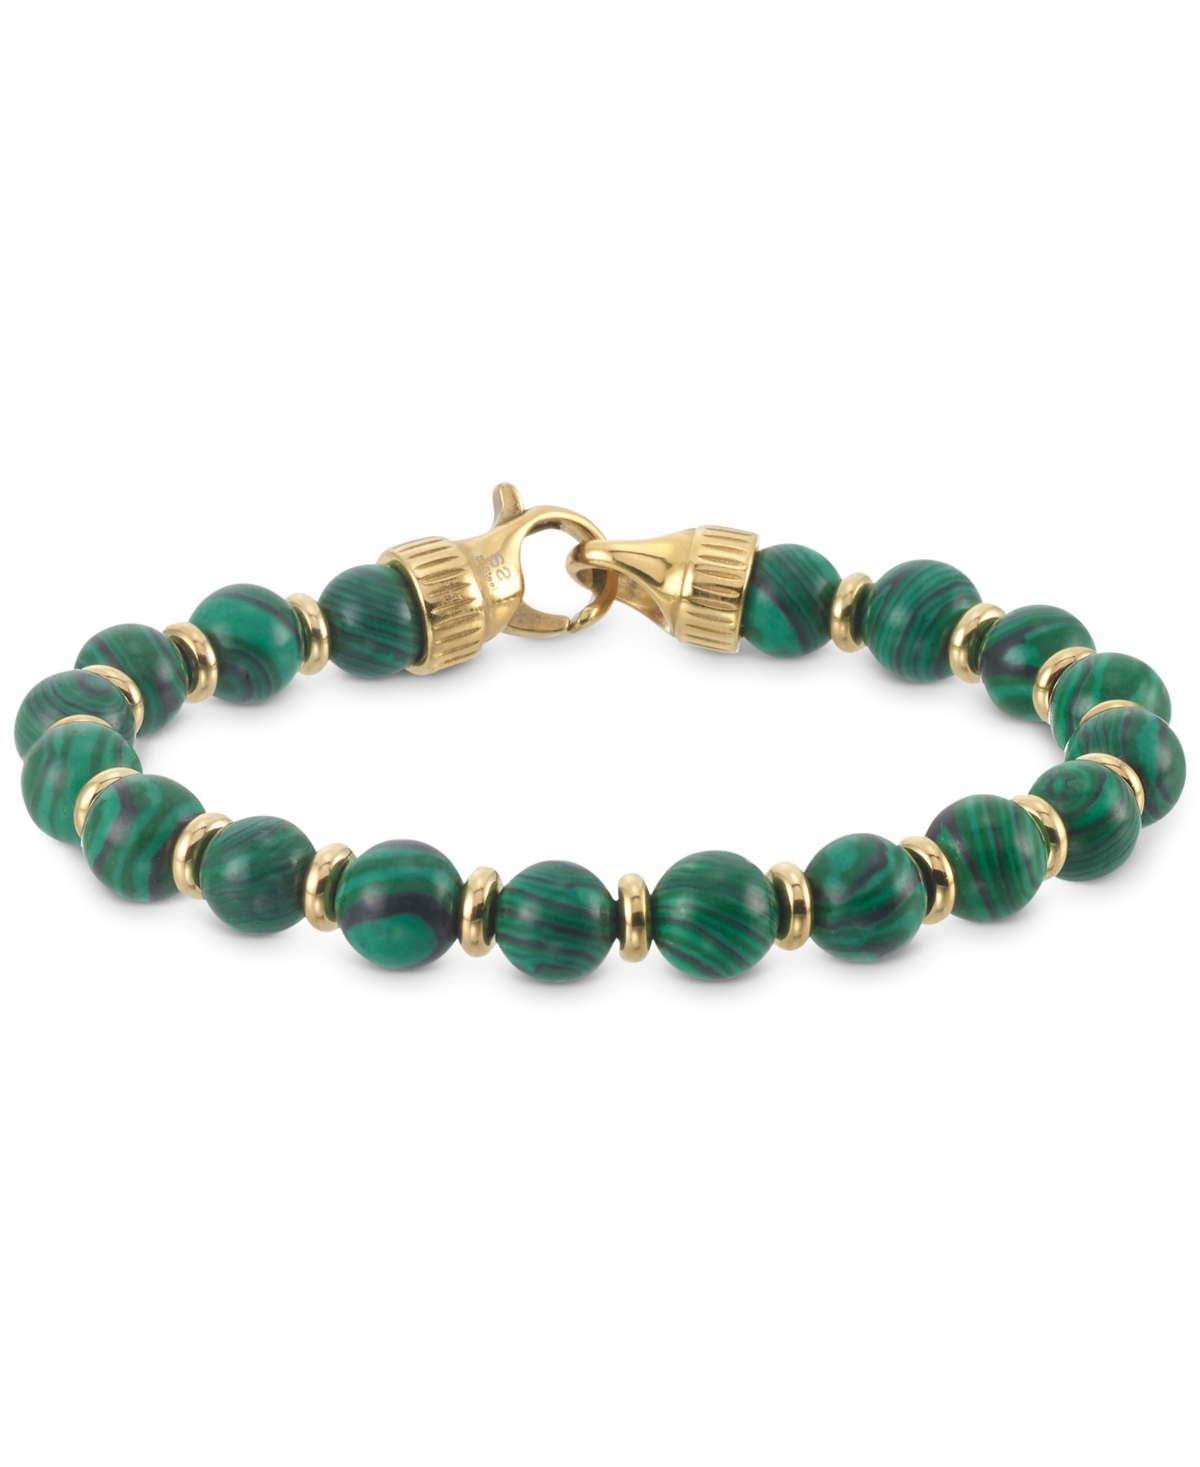 Smith Malachite Bead Stretch Bracelet in Gold-Tone Ion-Plated Stainless Steel - Malachite